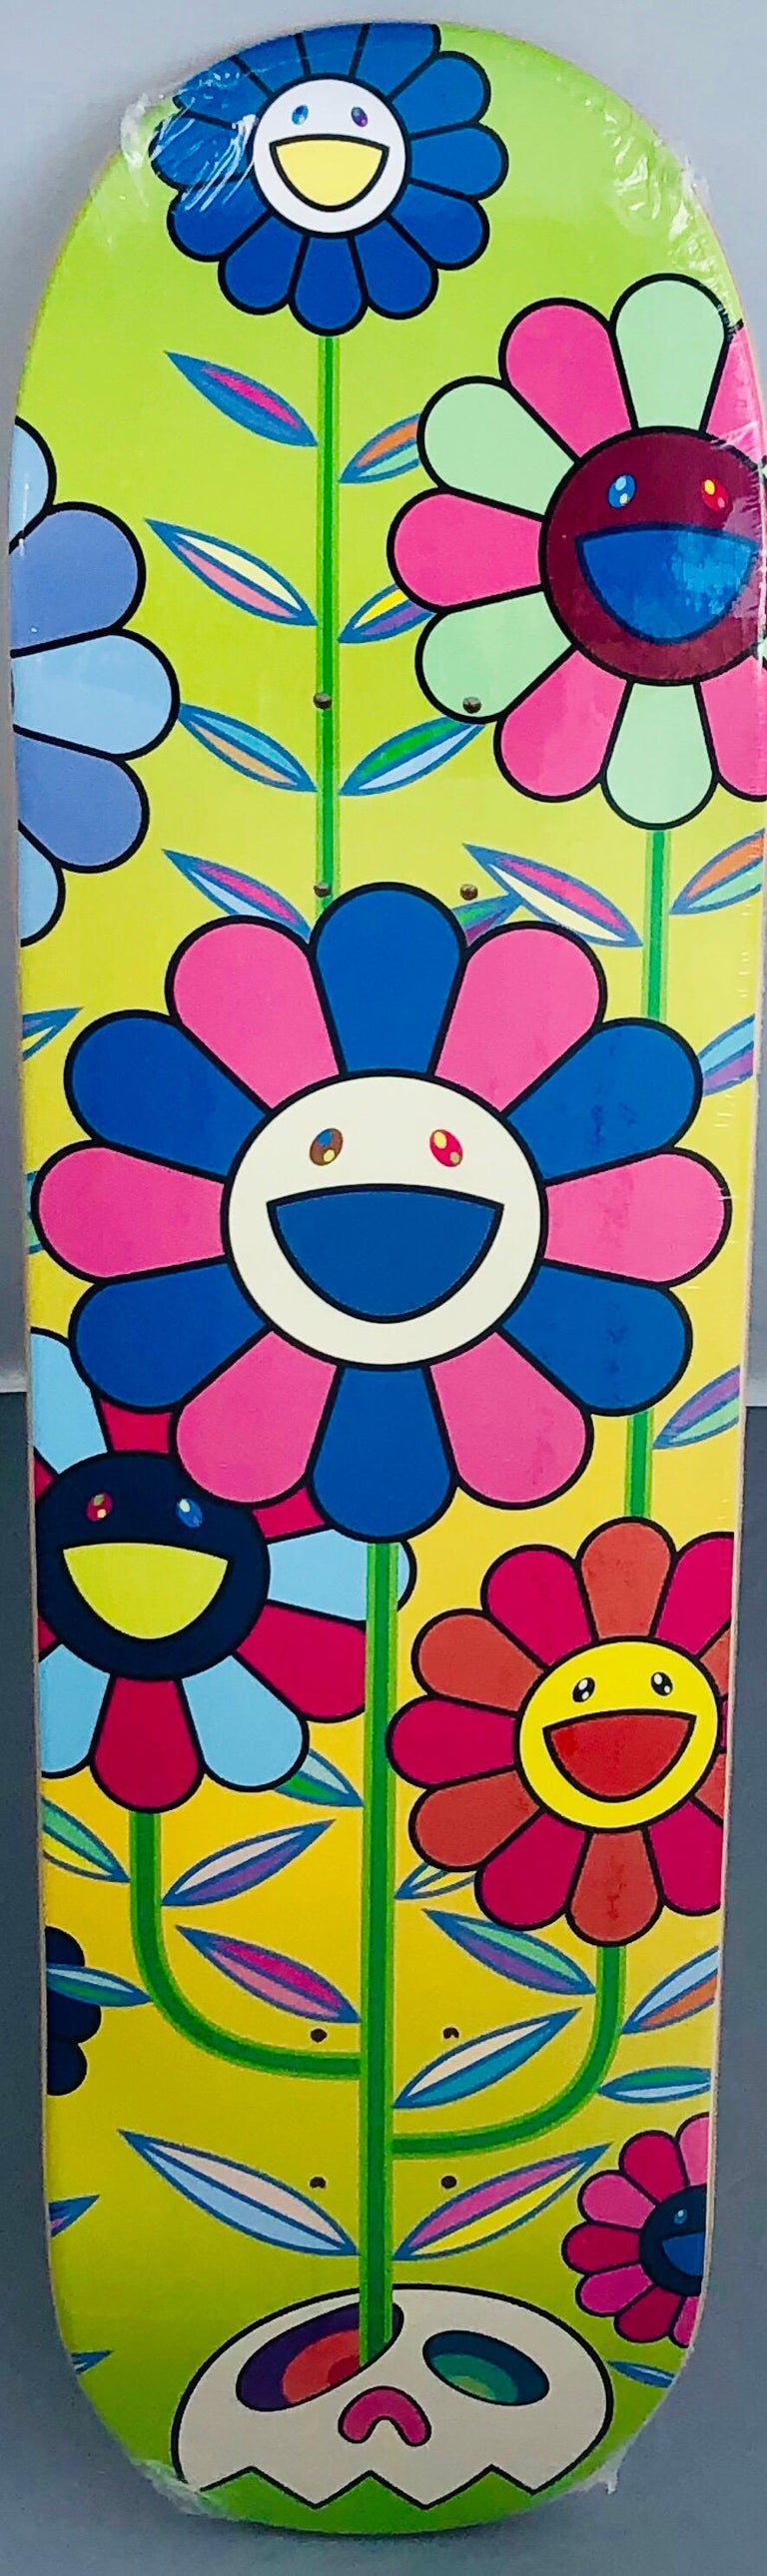 Takashi Murakami Flowers Skate Deck:
A vibrant piece of Takashi Murakami wall art produced as a completely sold out, limited series in 2019 in conjunction with Complexcon and Kaikai Kiki co. This deck is new in its original packaging. A brilliant